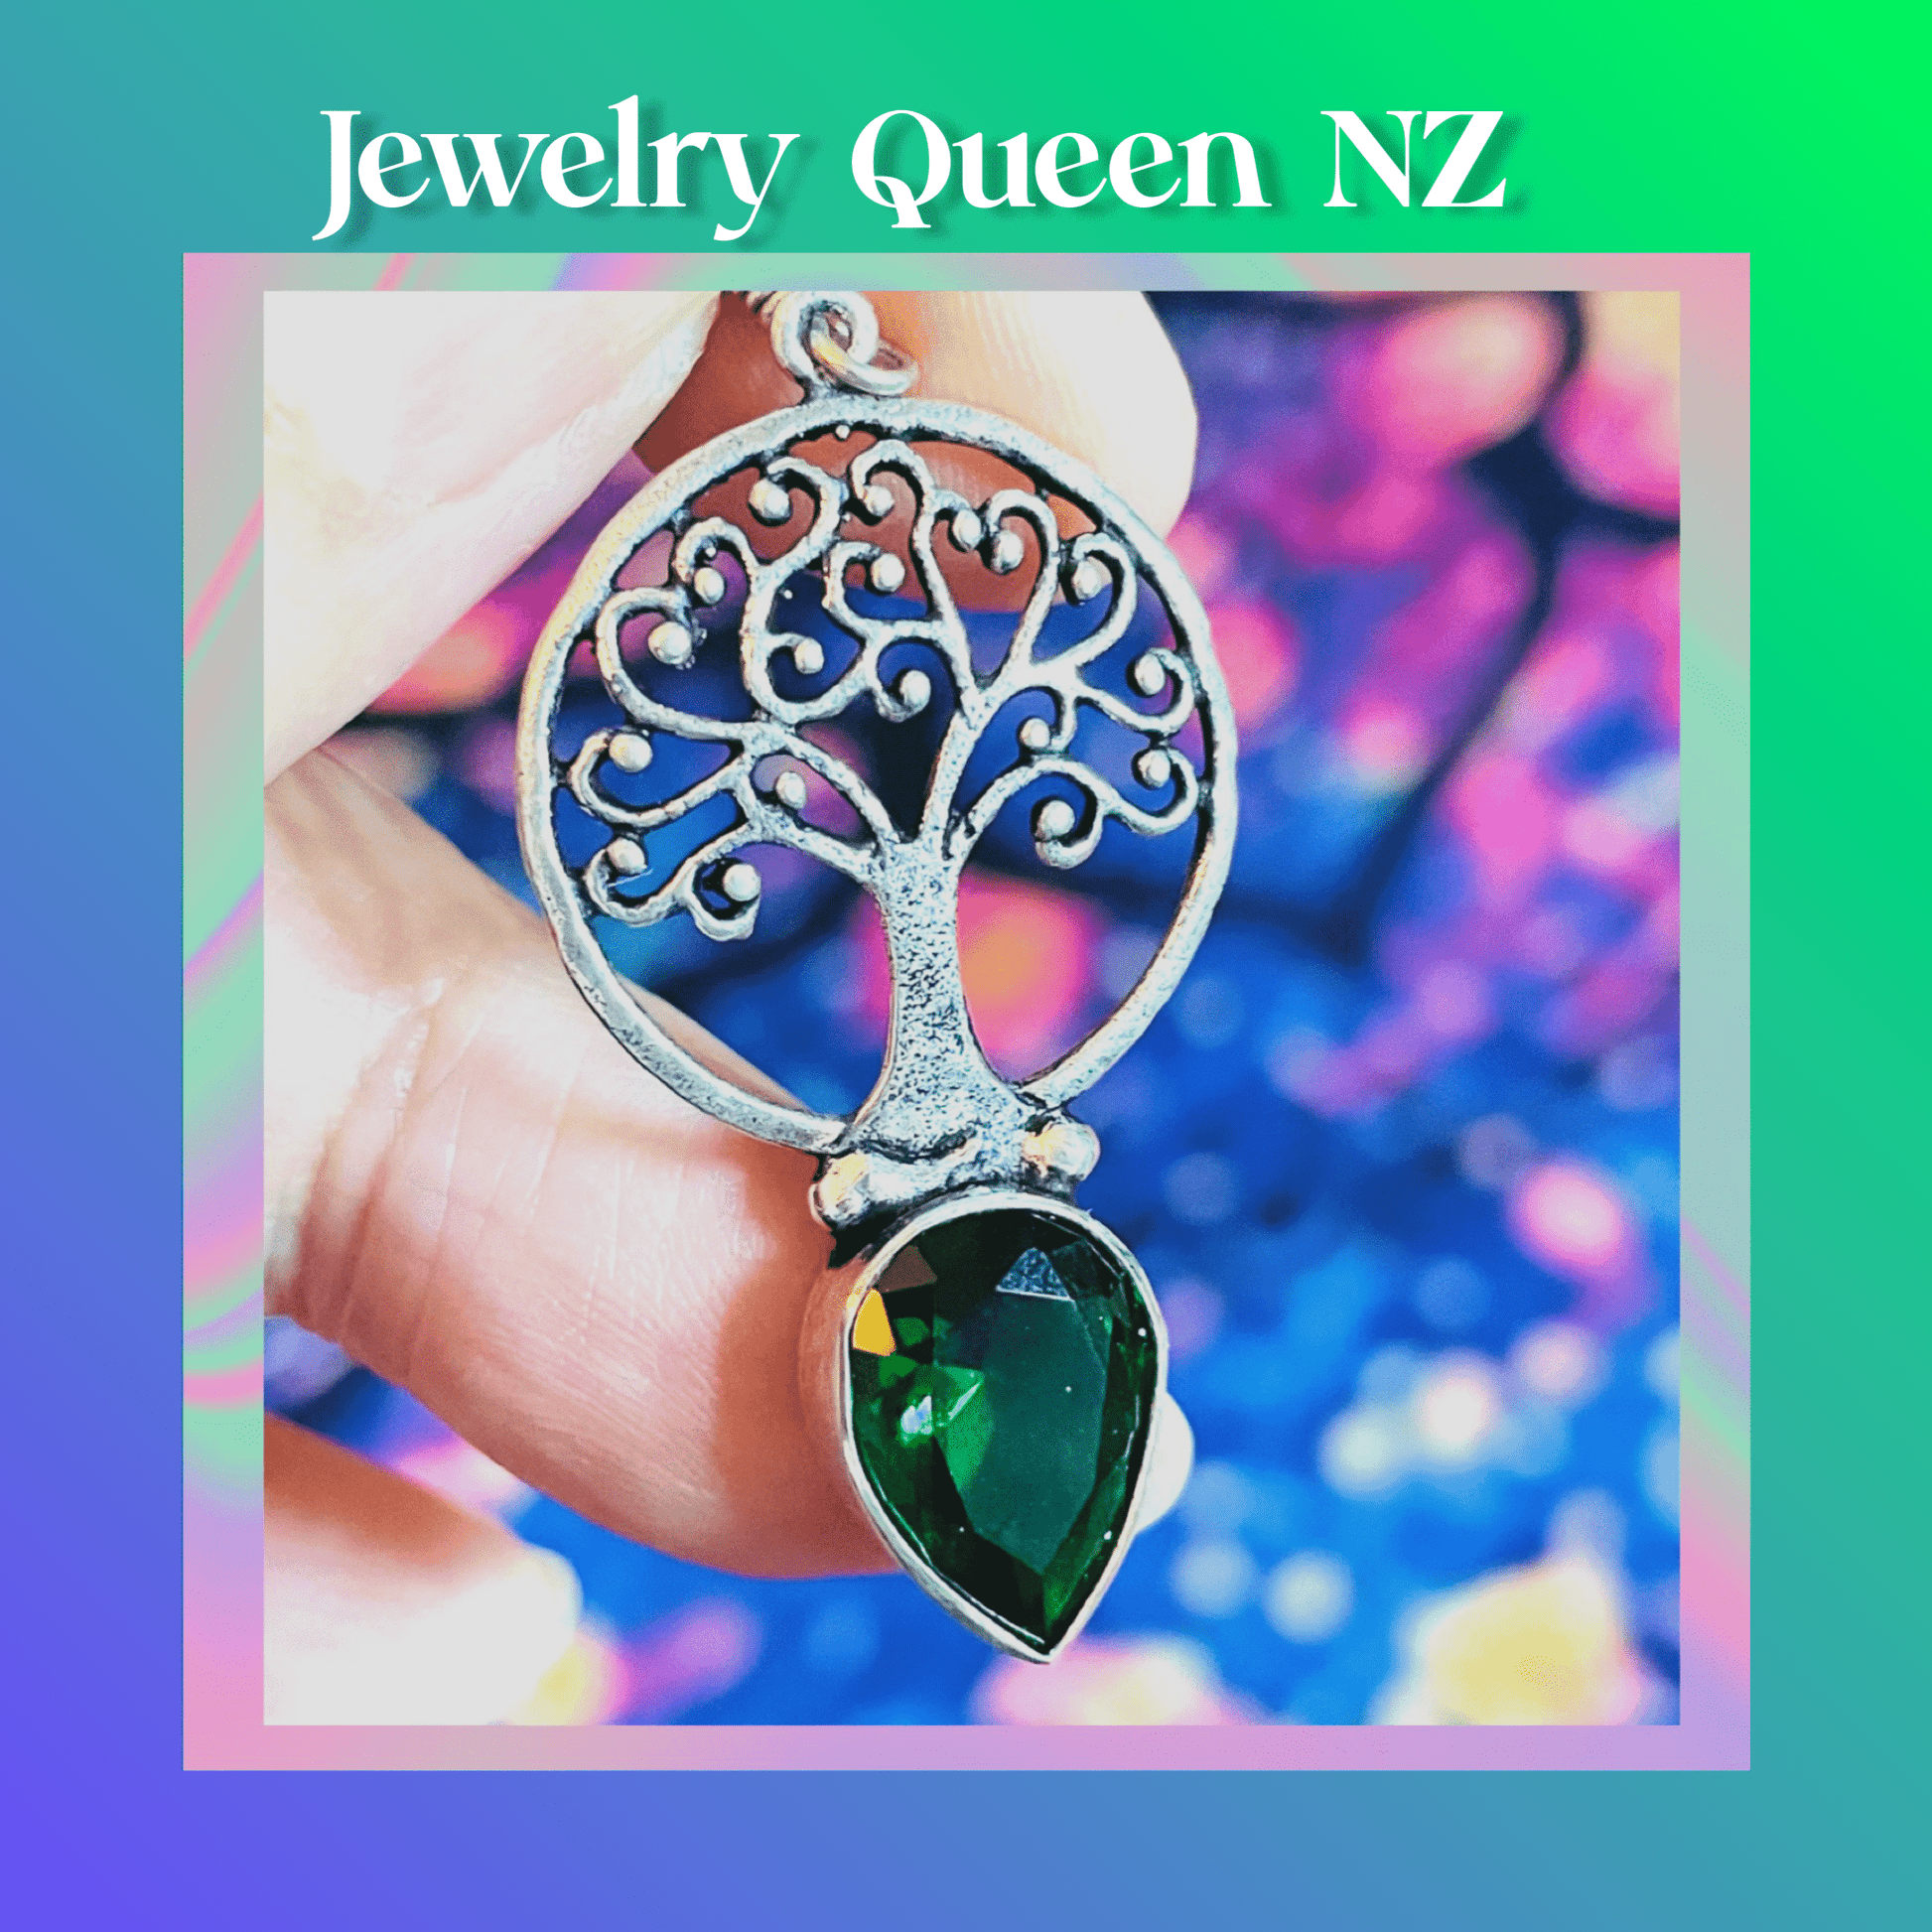 Tree of life Chrome Diopside earrings and Moonstone pendant Jewelry Sets